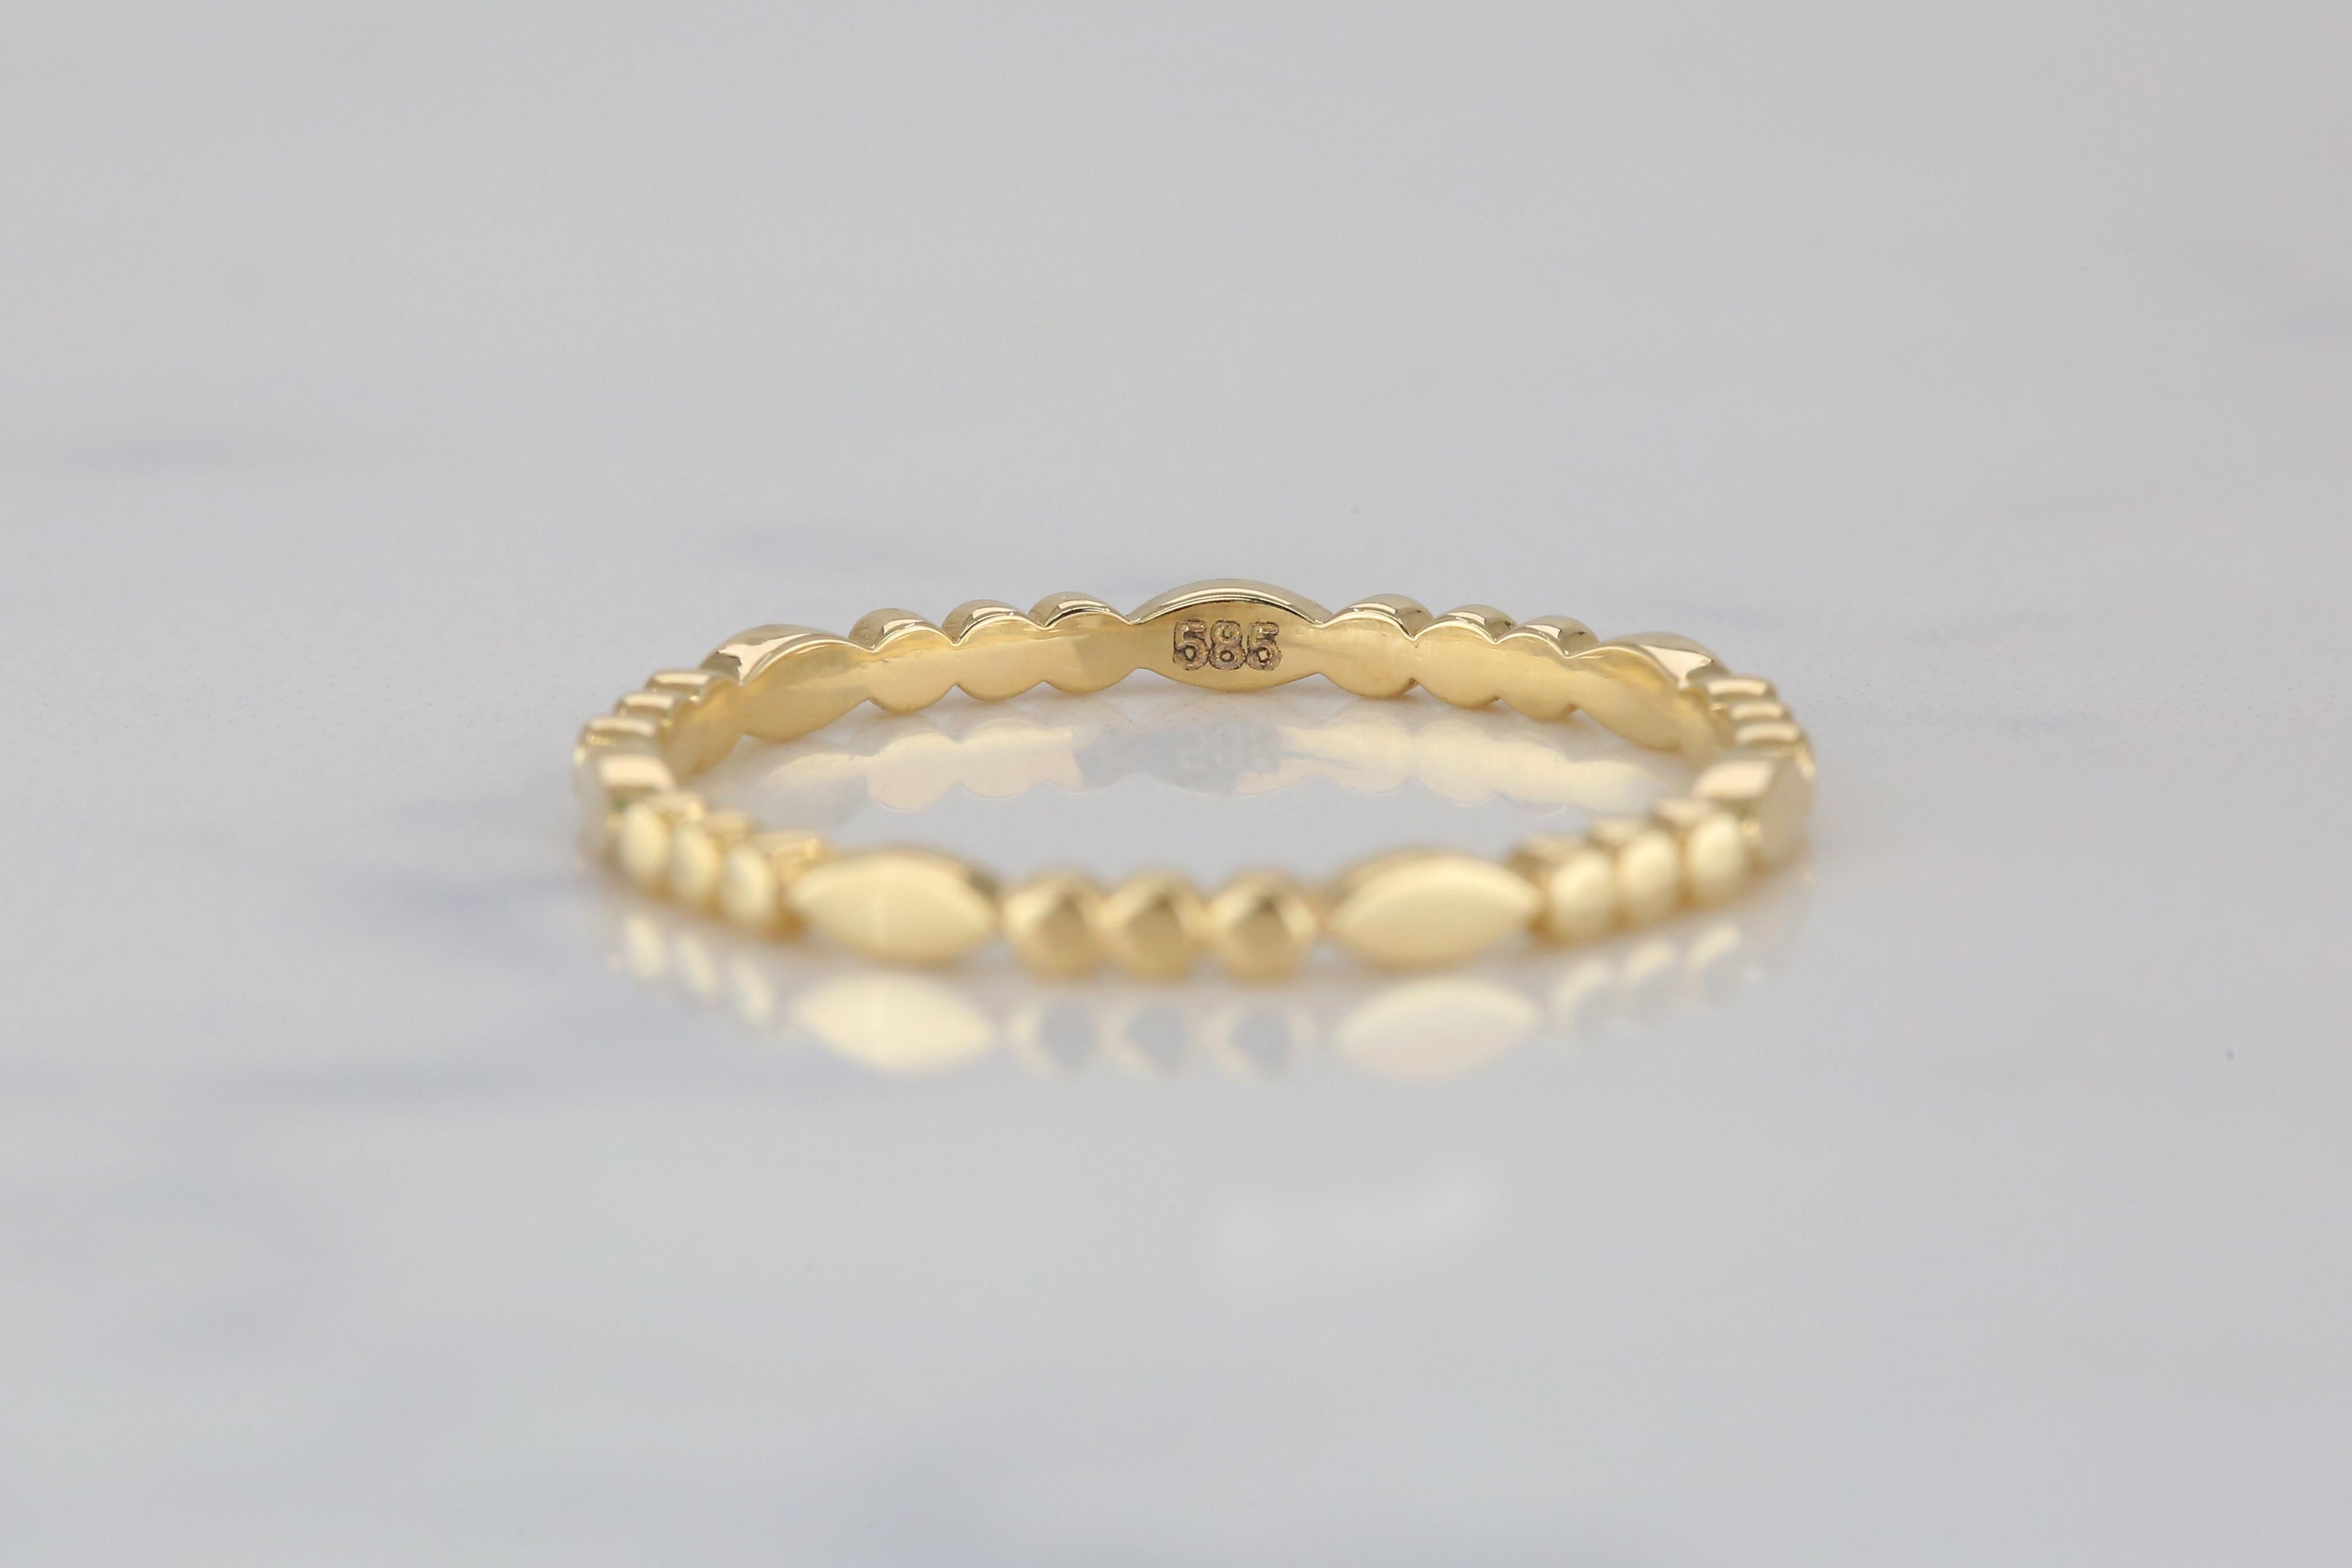 For Sale:  14 K Solid Gold Round Dot Ring Chain Link Ring, Modern Minimal Band Ring 7